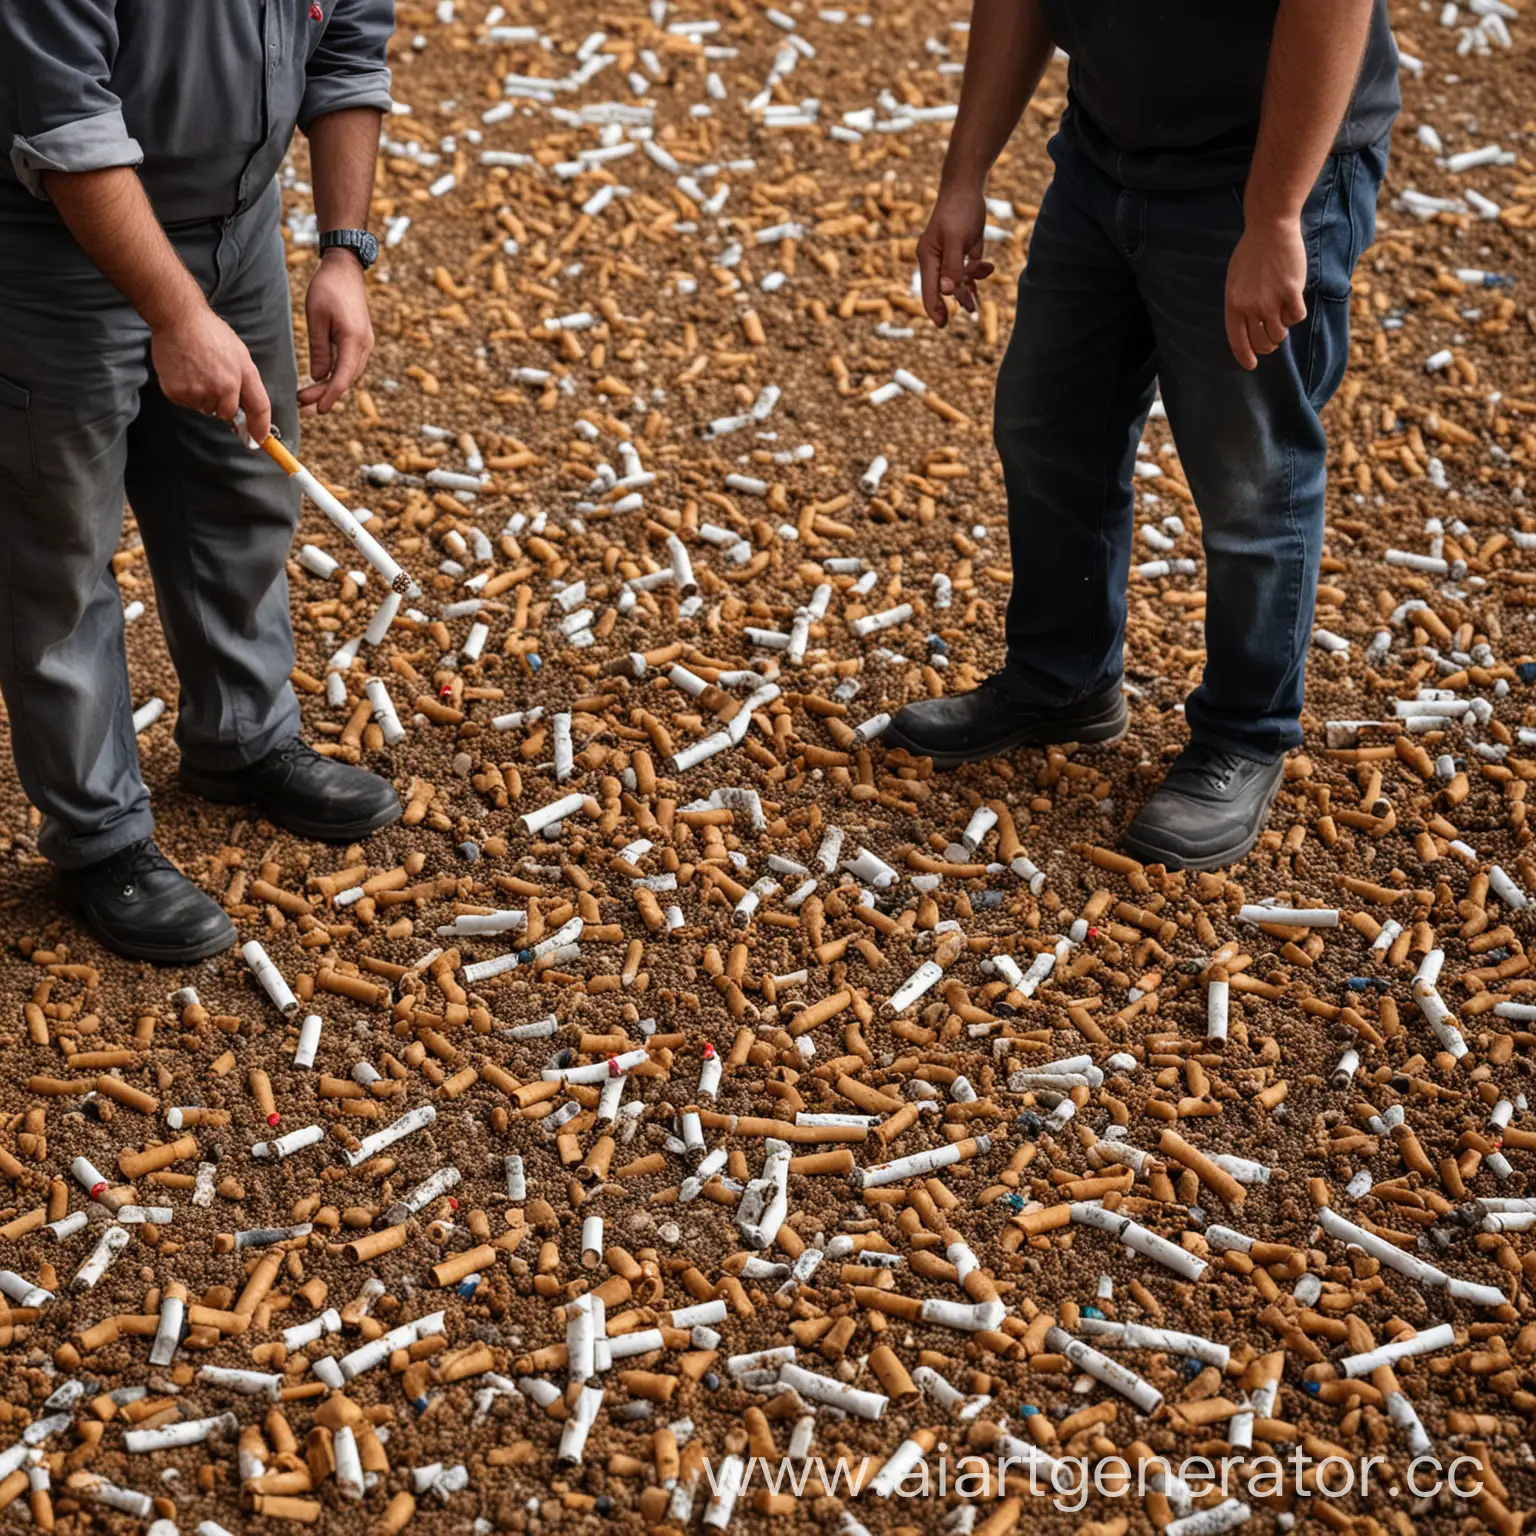 IndustrialScale-Cigarette-Butt-Sorting-by-Turks